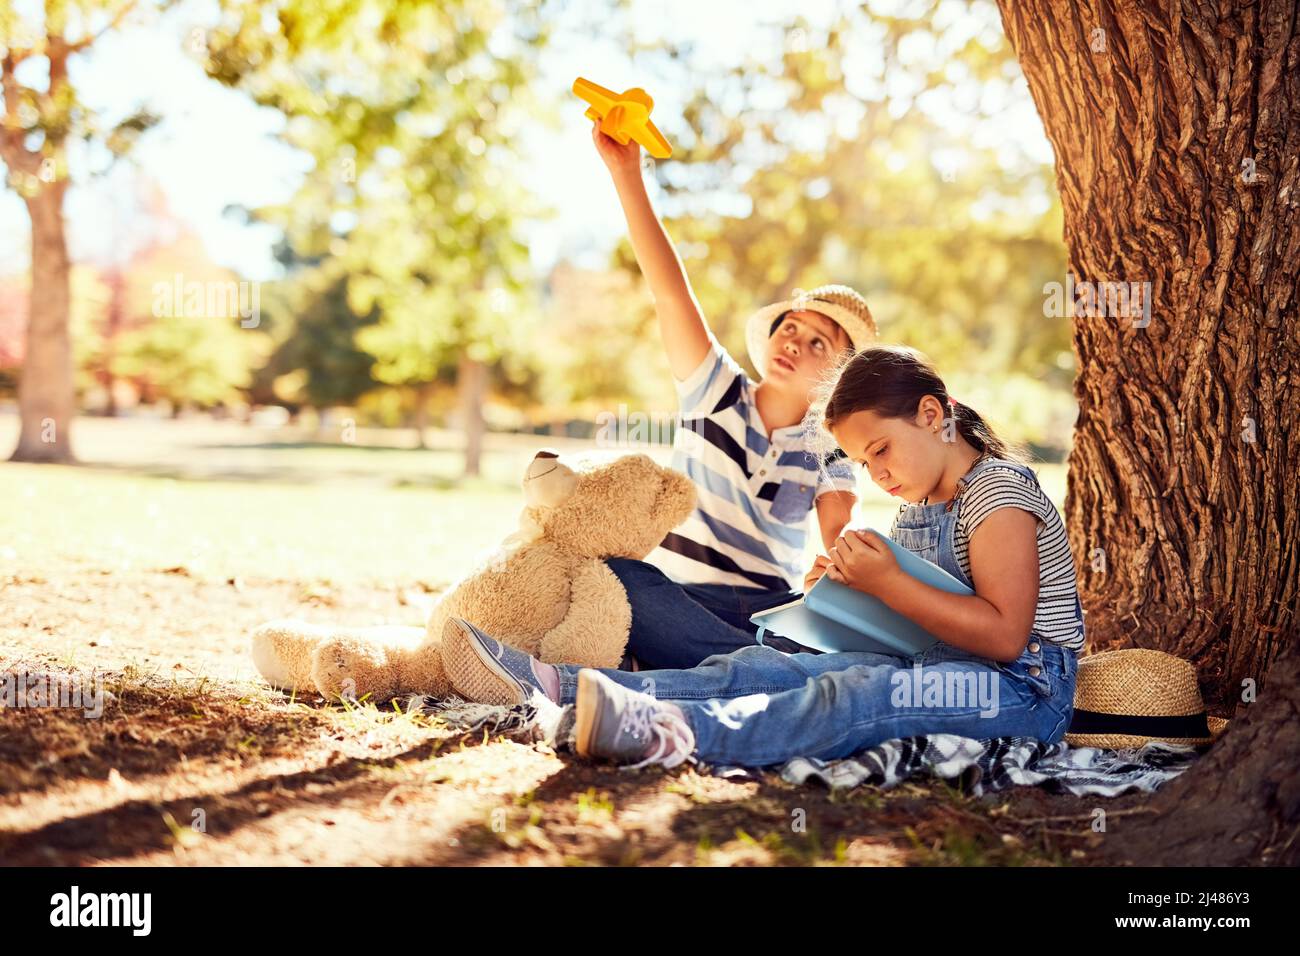 Enjoying their own little adventures at the park. Shot of two little siblings having fun while sitting on a blanket at the park. Stock Photo